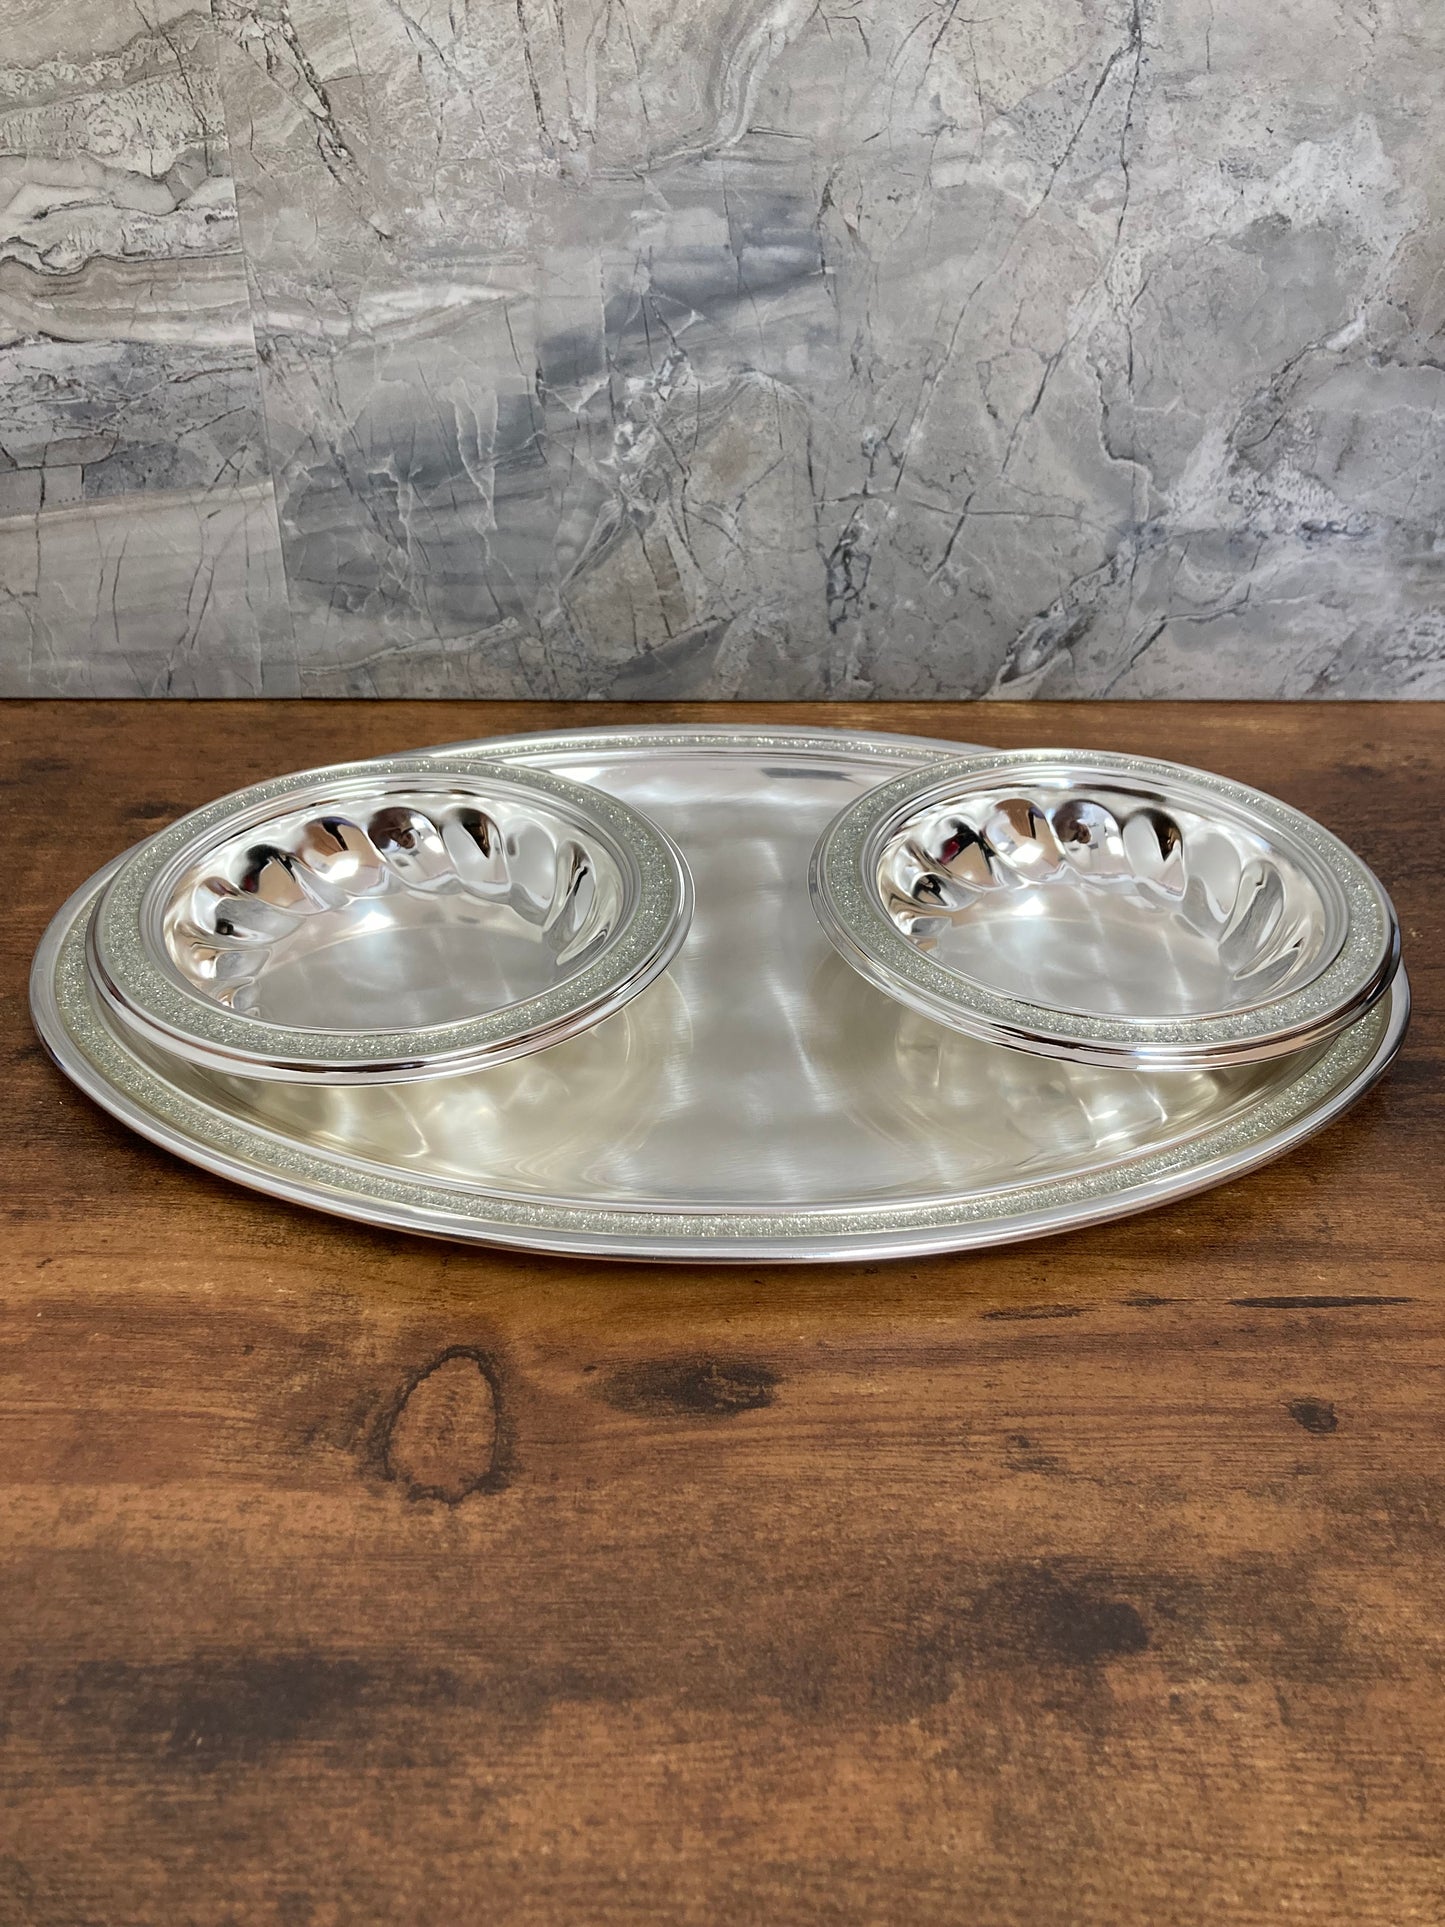 Oval Serving Tray Platter with 2 bowls .Made in Italy diamond cut rim perfect for Caviar butter and shot glasses.